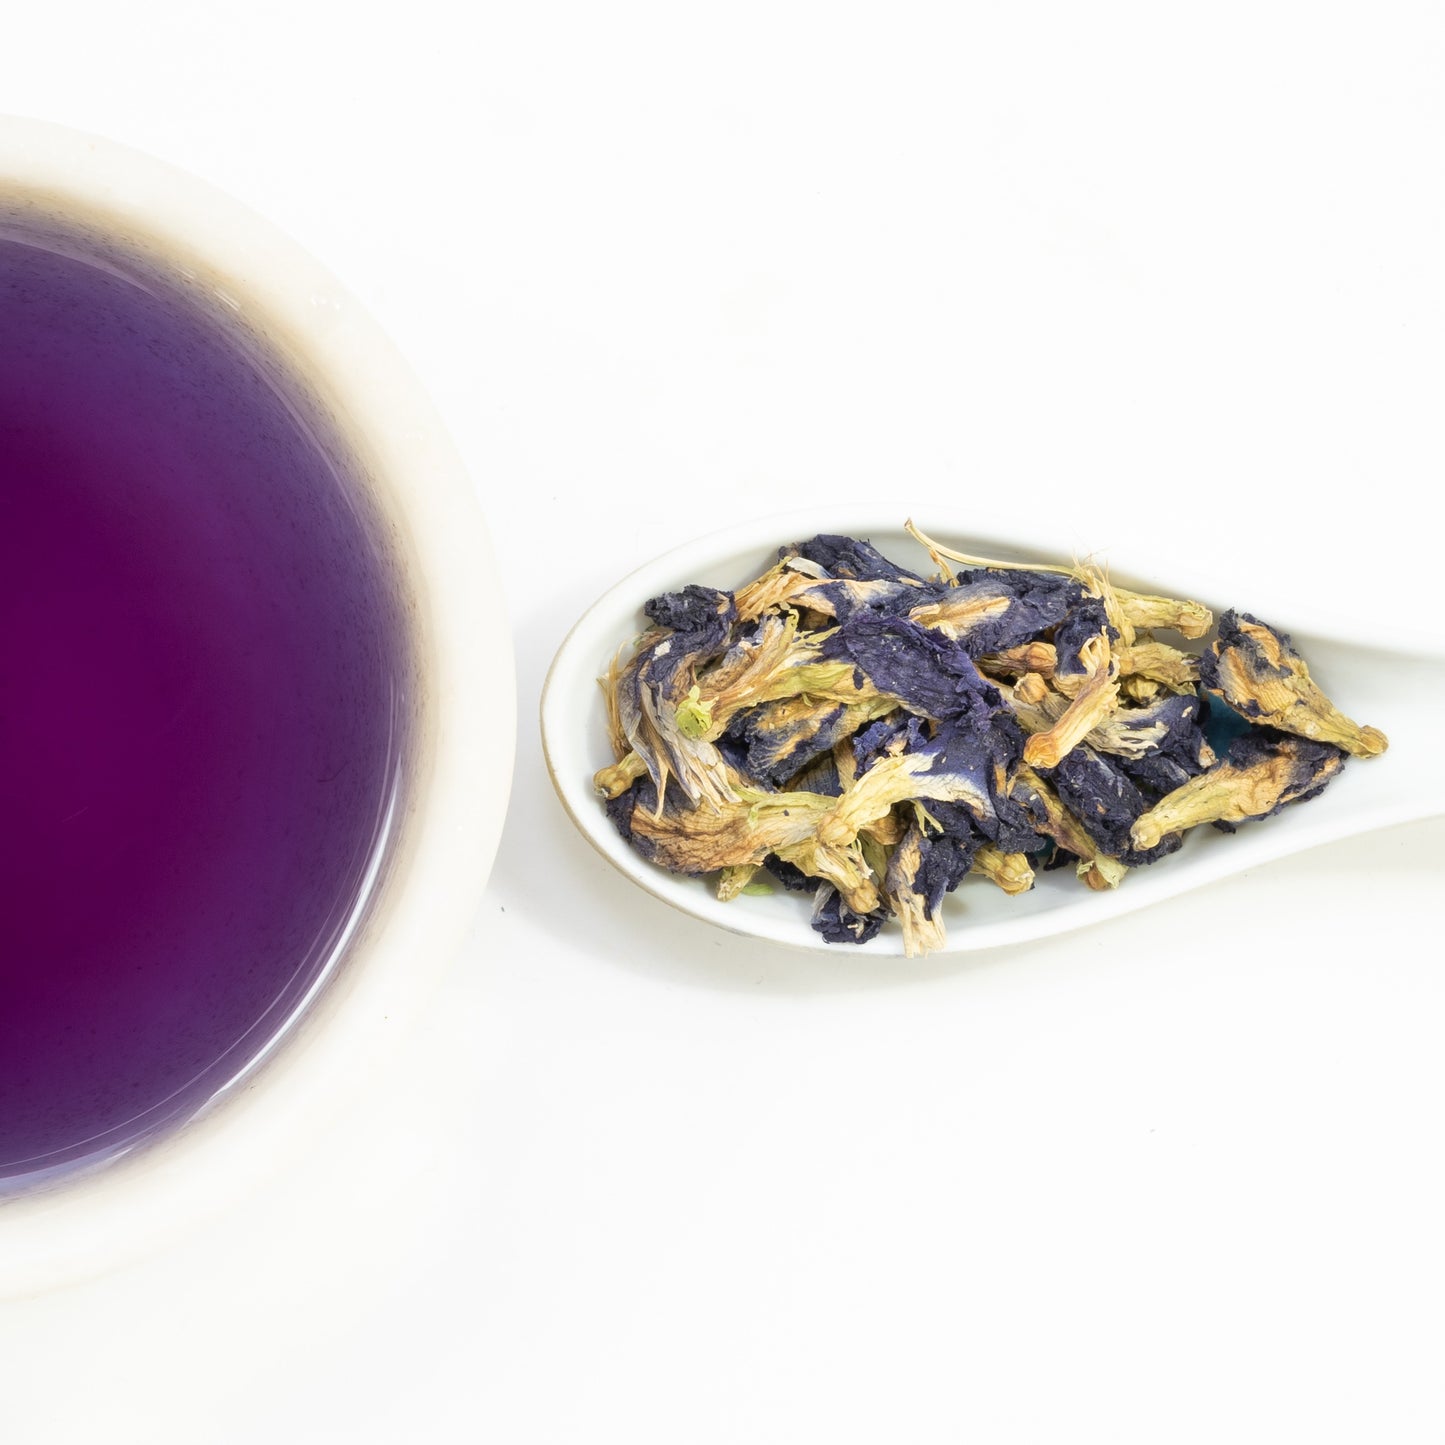 Butterfly Pea flower Tea (Making a Beautiful & Magical Drink)